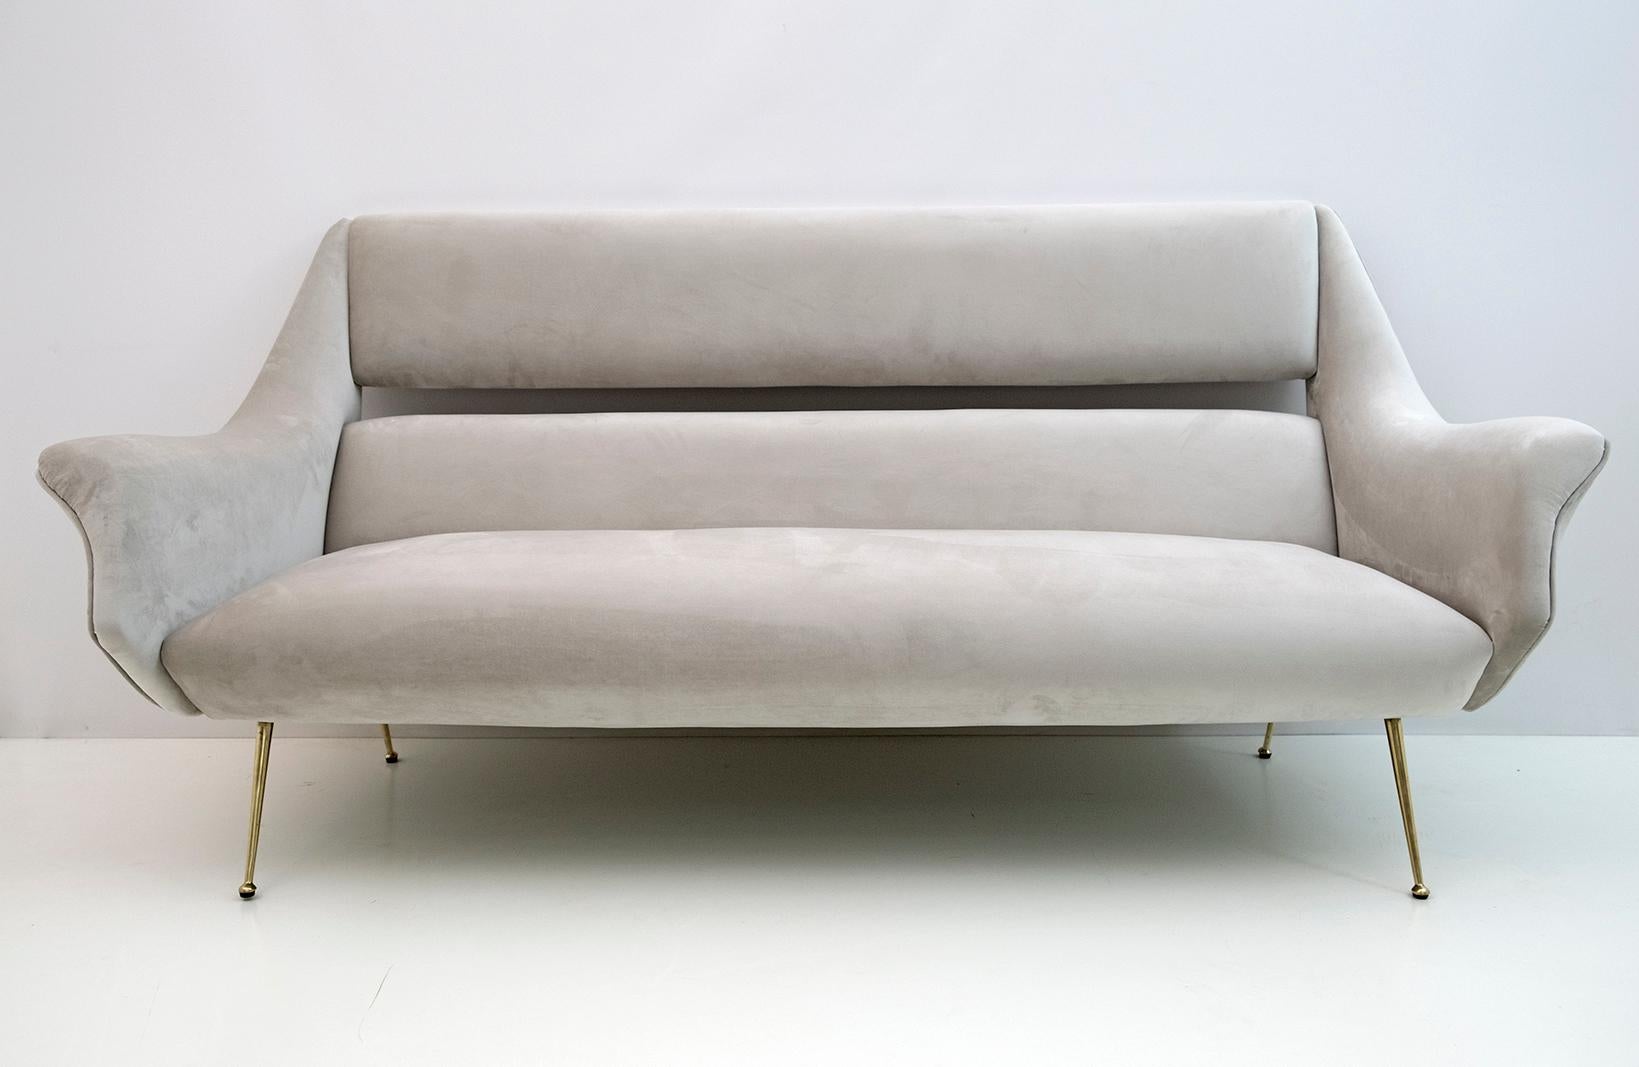 Sofa designed by Gigi Radice for Minotti. Made with solid wood structure and light gray velvet upholstery and polished brass legs. The sofa is authentic, only the upholstery has been replaced.